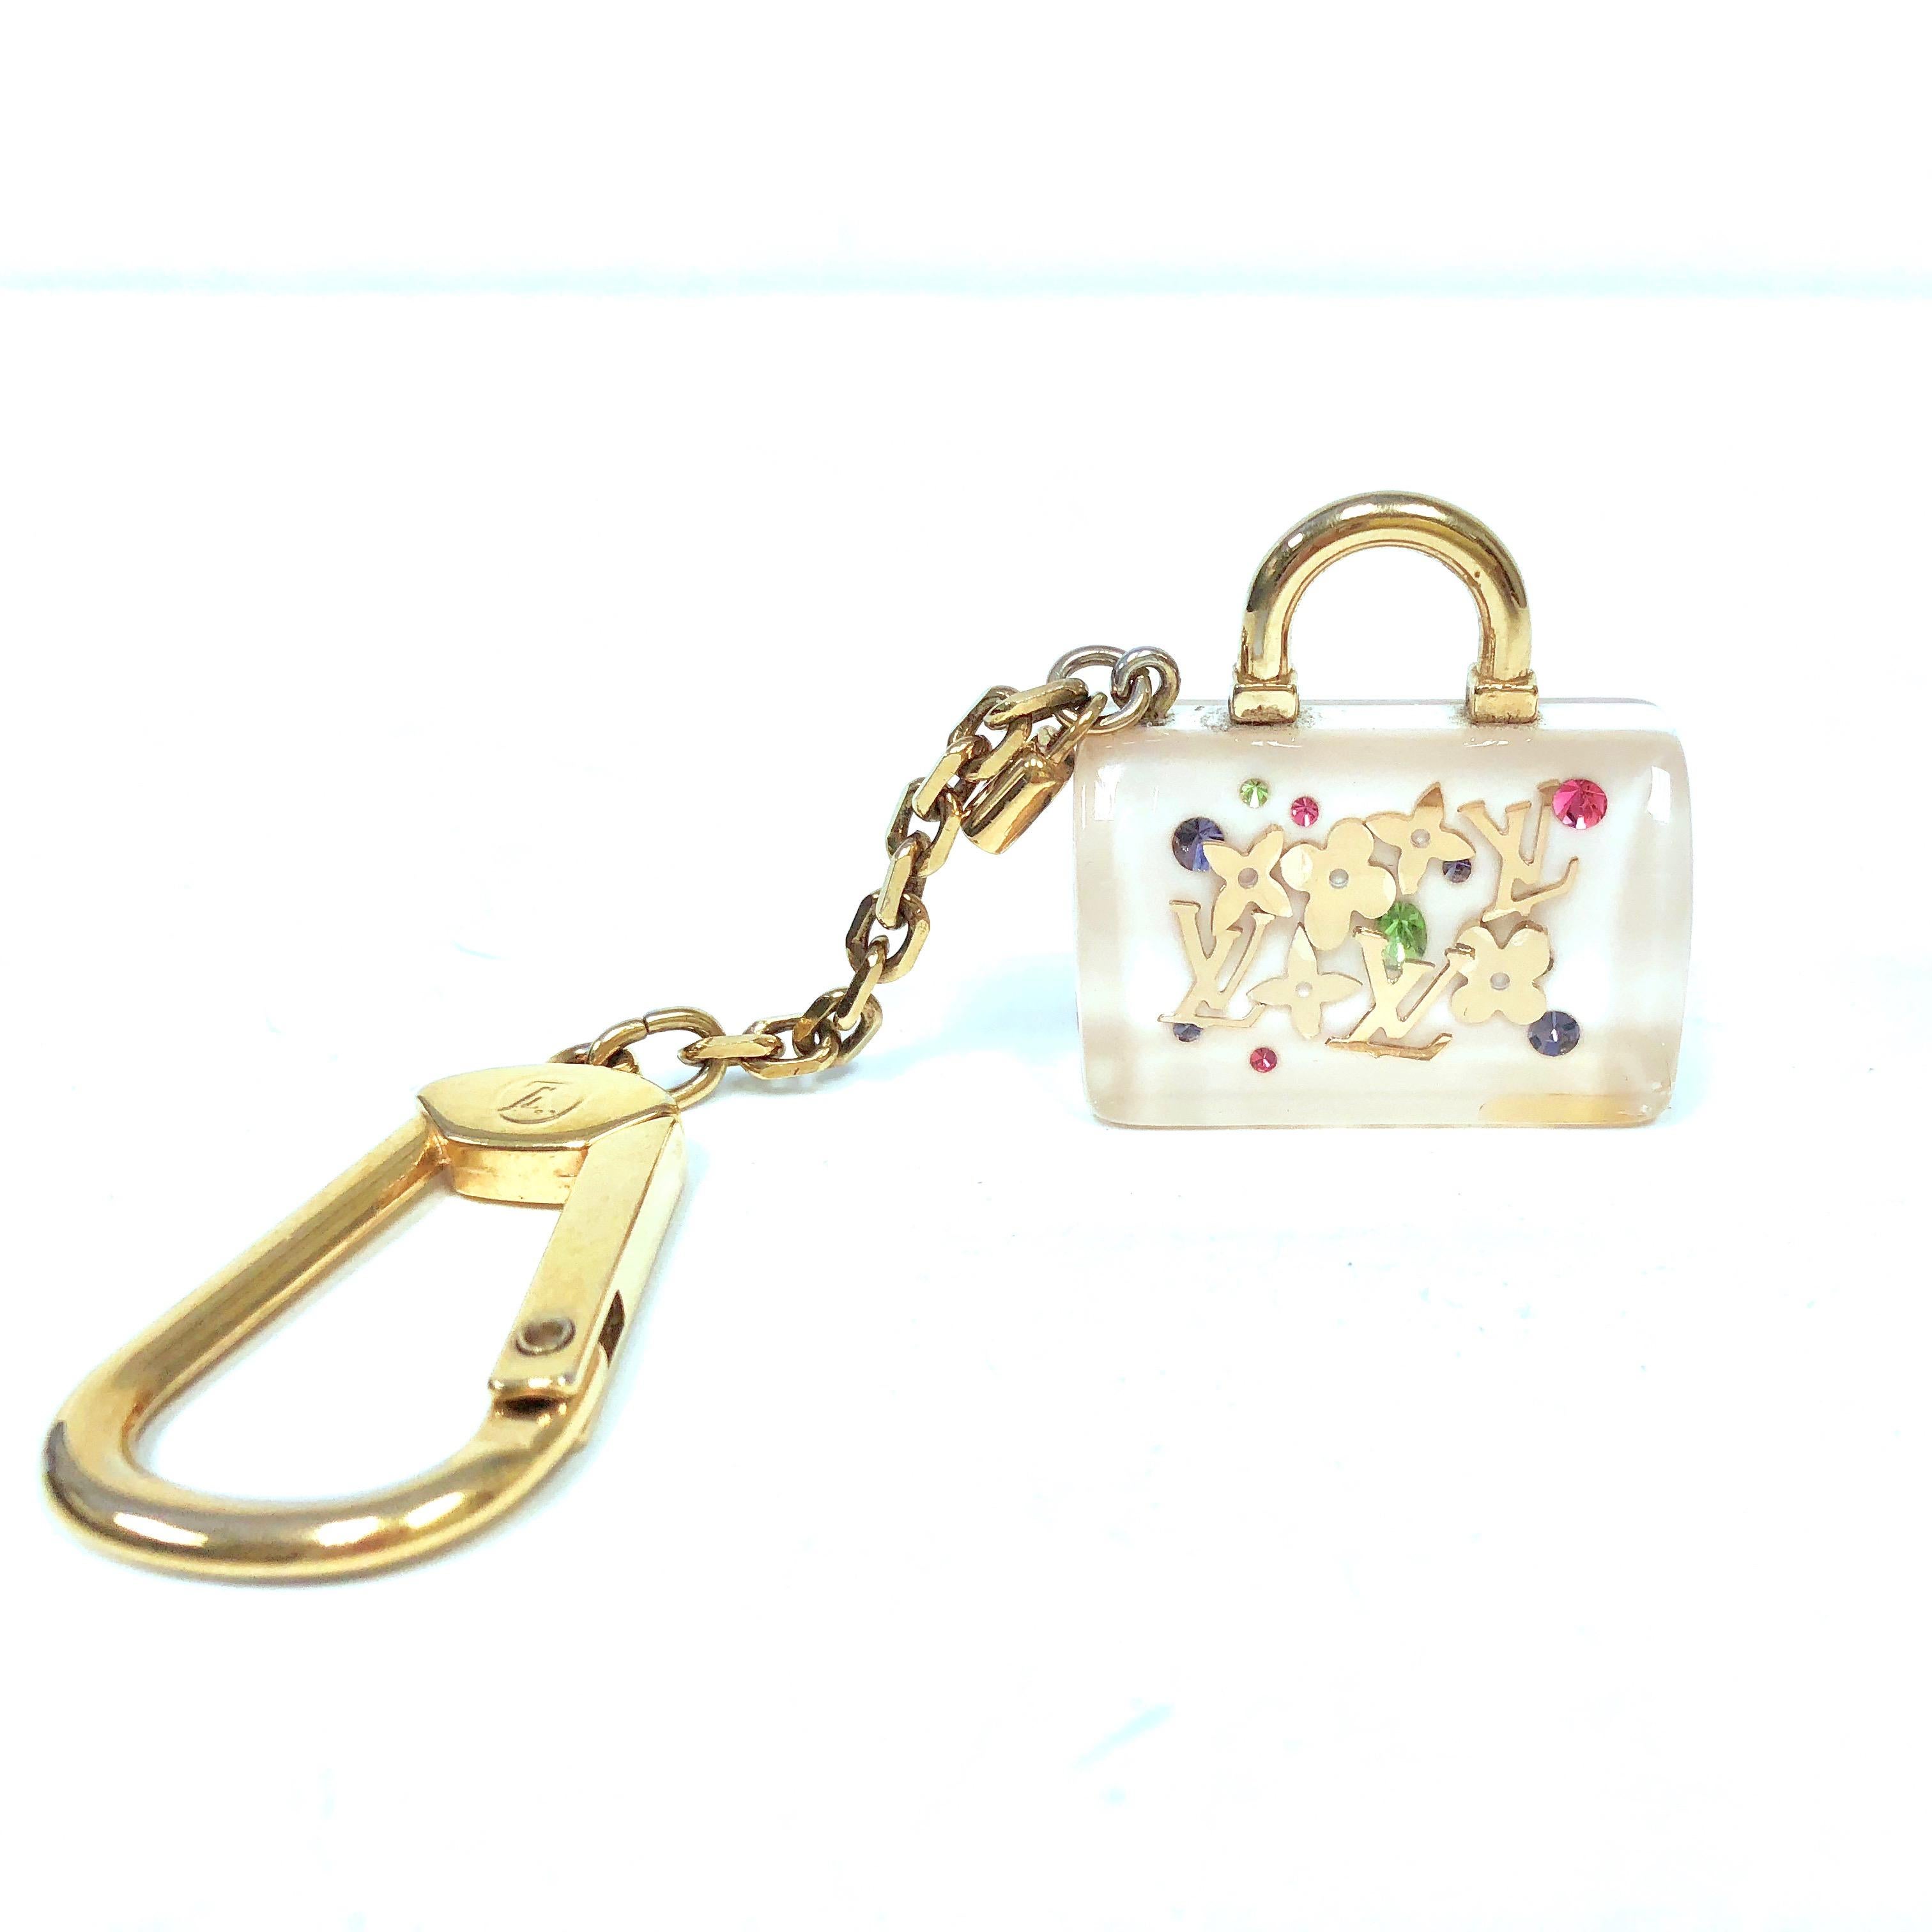 This Louis Vuitton white Speedy Inclusion charm features a white and clear resin Speedy bag with goldtone monogram logos and quatrefoils. The chain can be clipped on most metallic links on handbags or used as a key holder. 
Measurements: 4.5